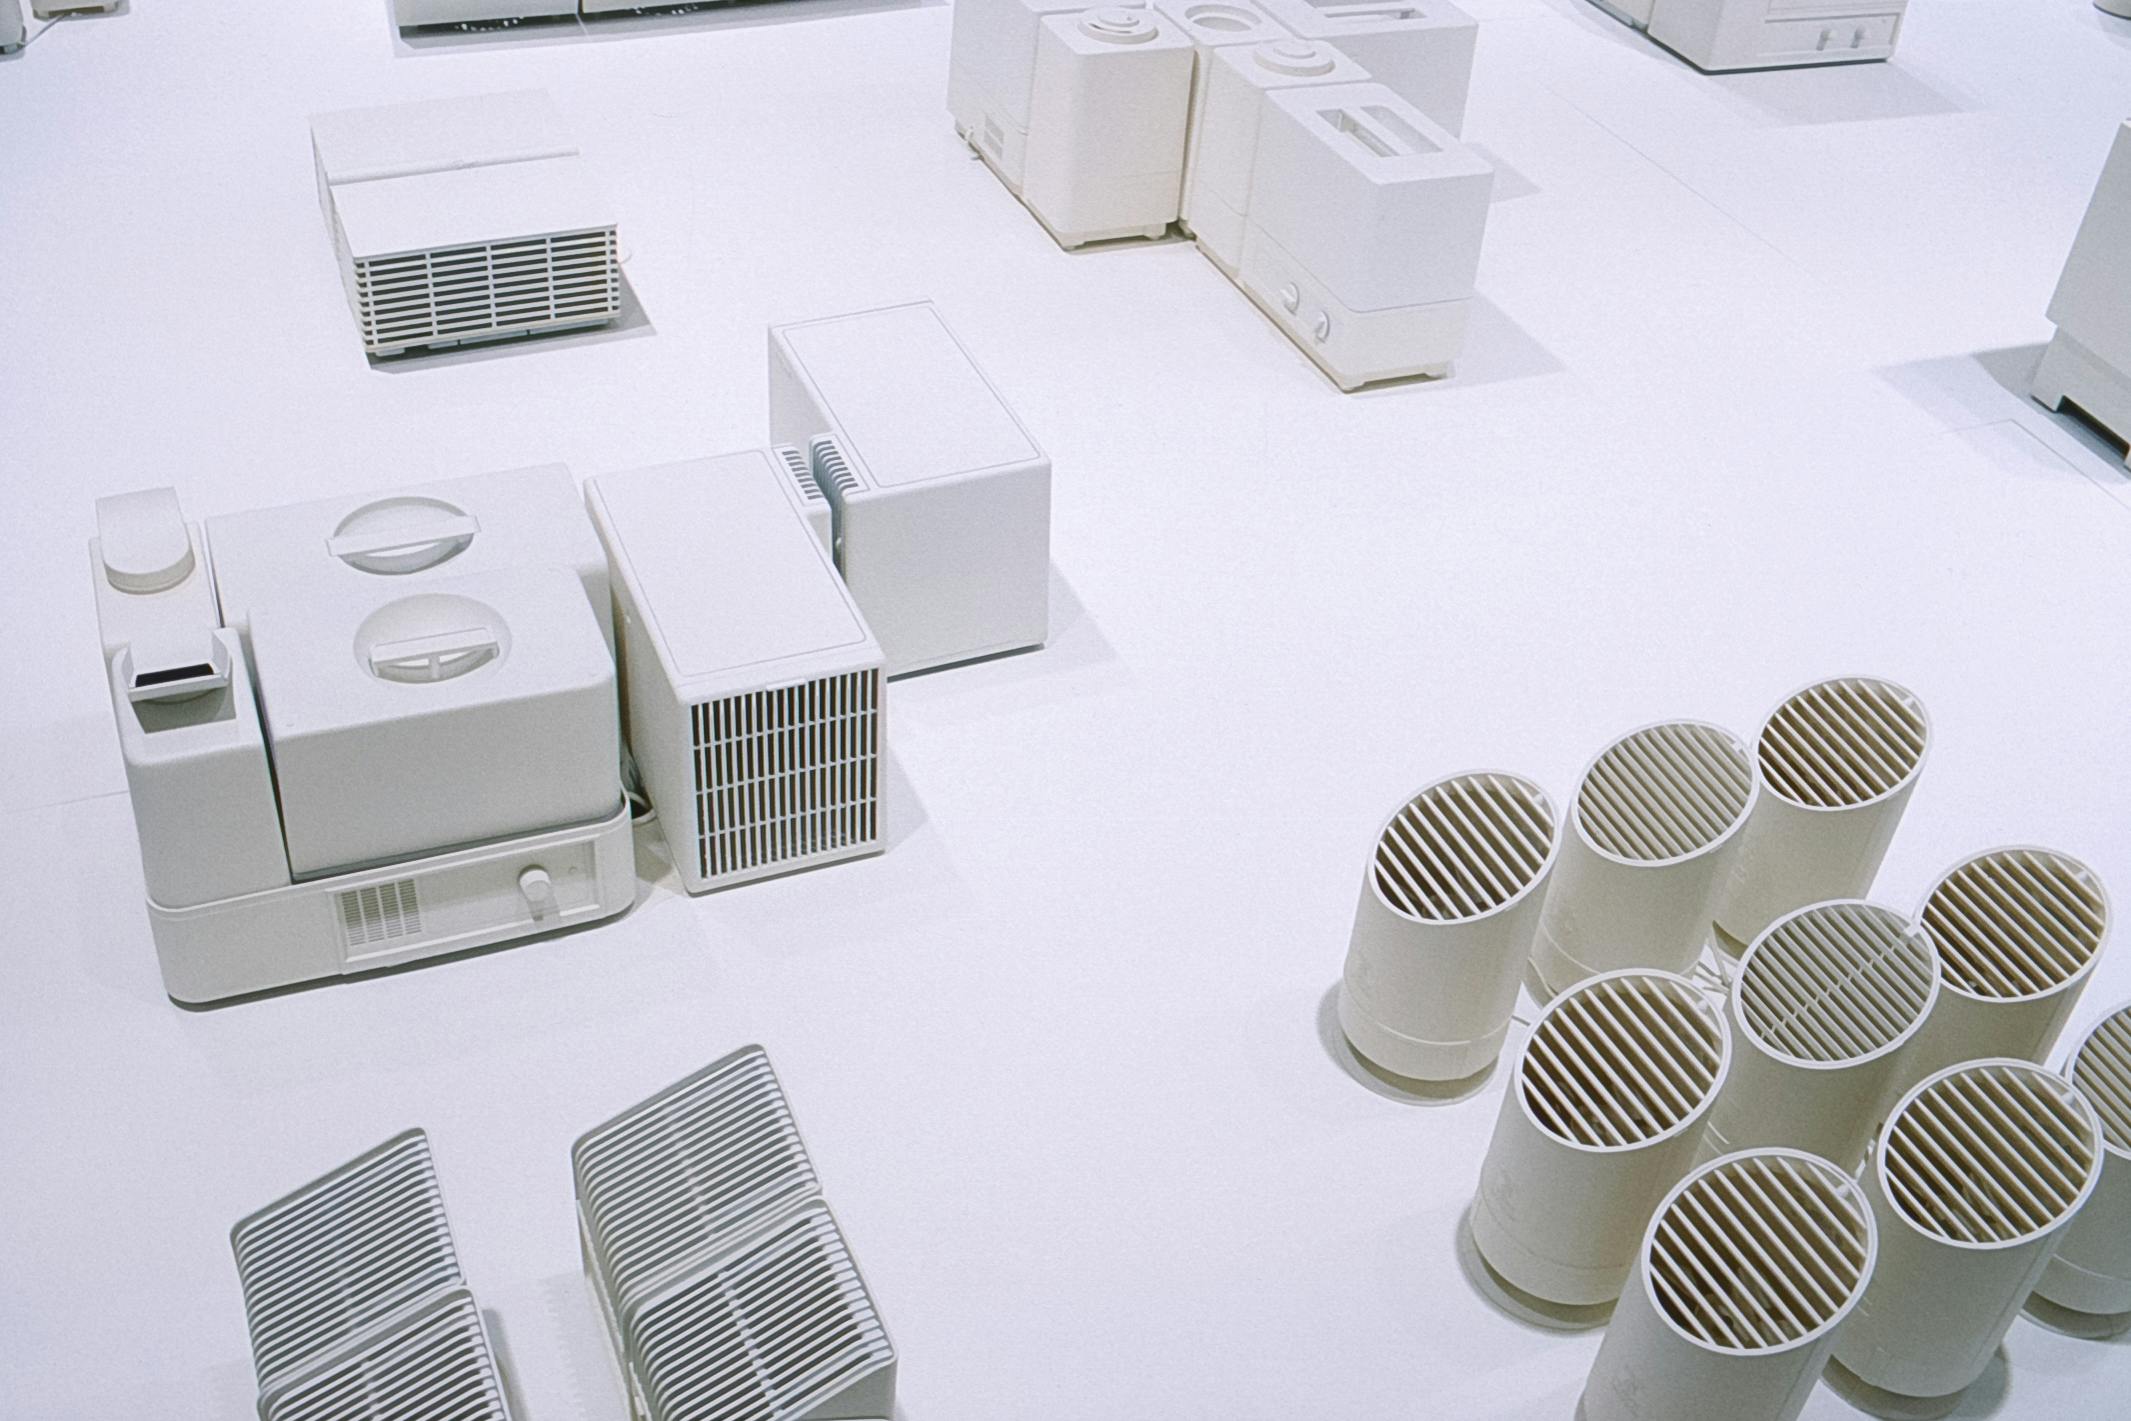 Detail of an art installation by An Te Liu. White mockups of electronic devices, many of which look like humidifiers, are placed on a white surface. 